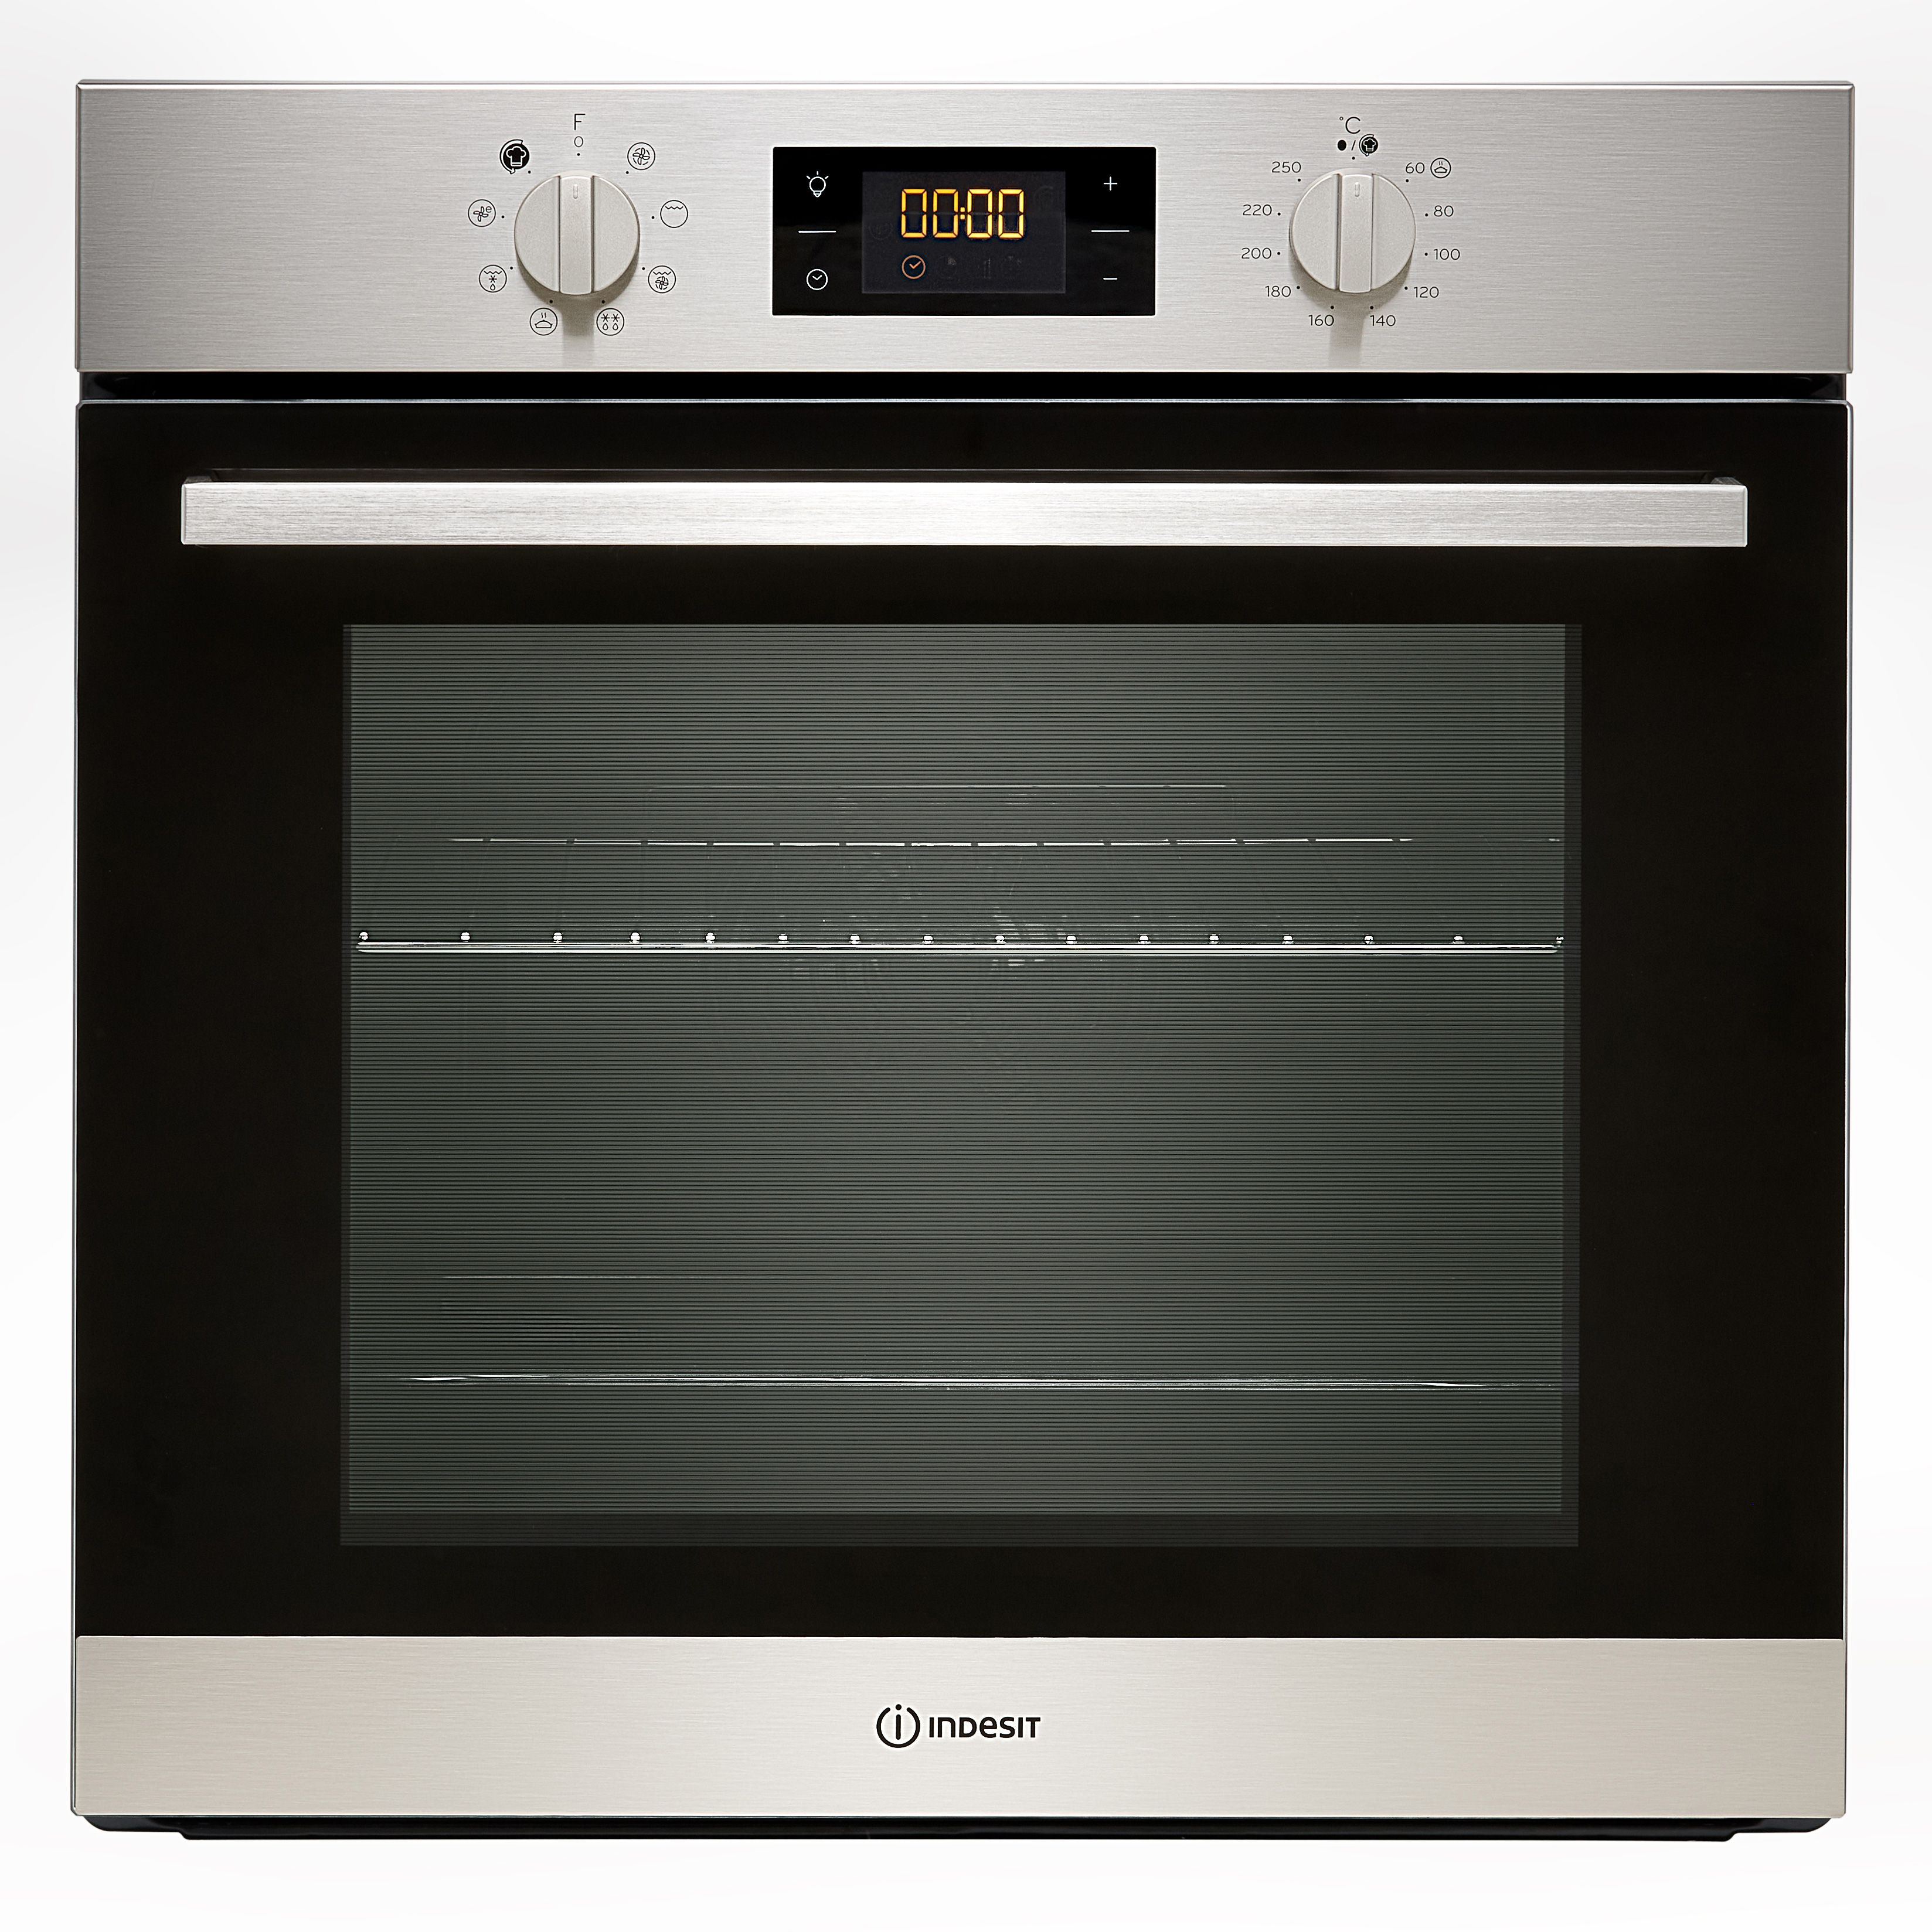 Indesit Aria IFW6340IX Built In Electric Single Oven - Stainless Steel - A Rated, Stainless Steel